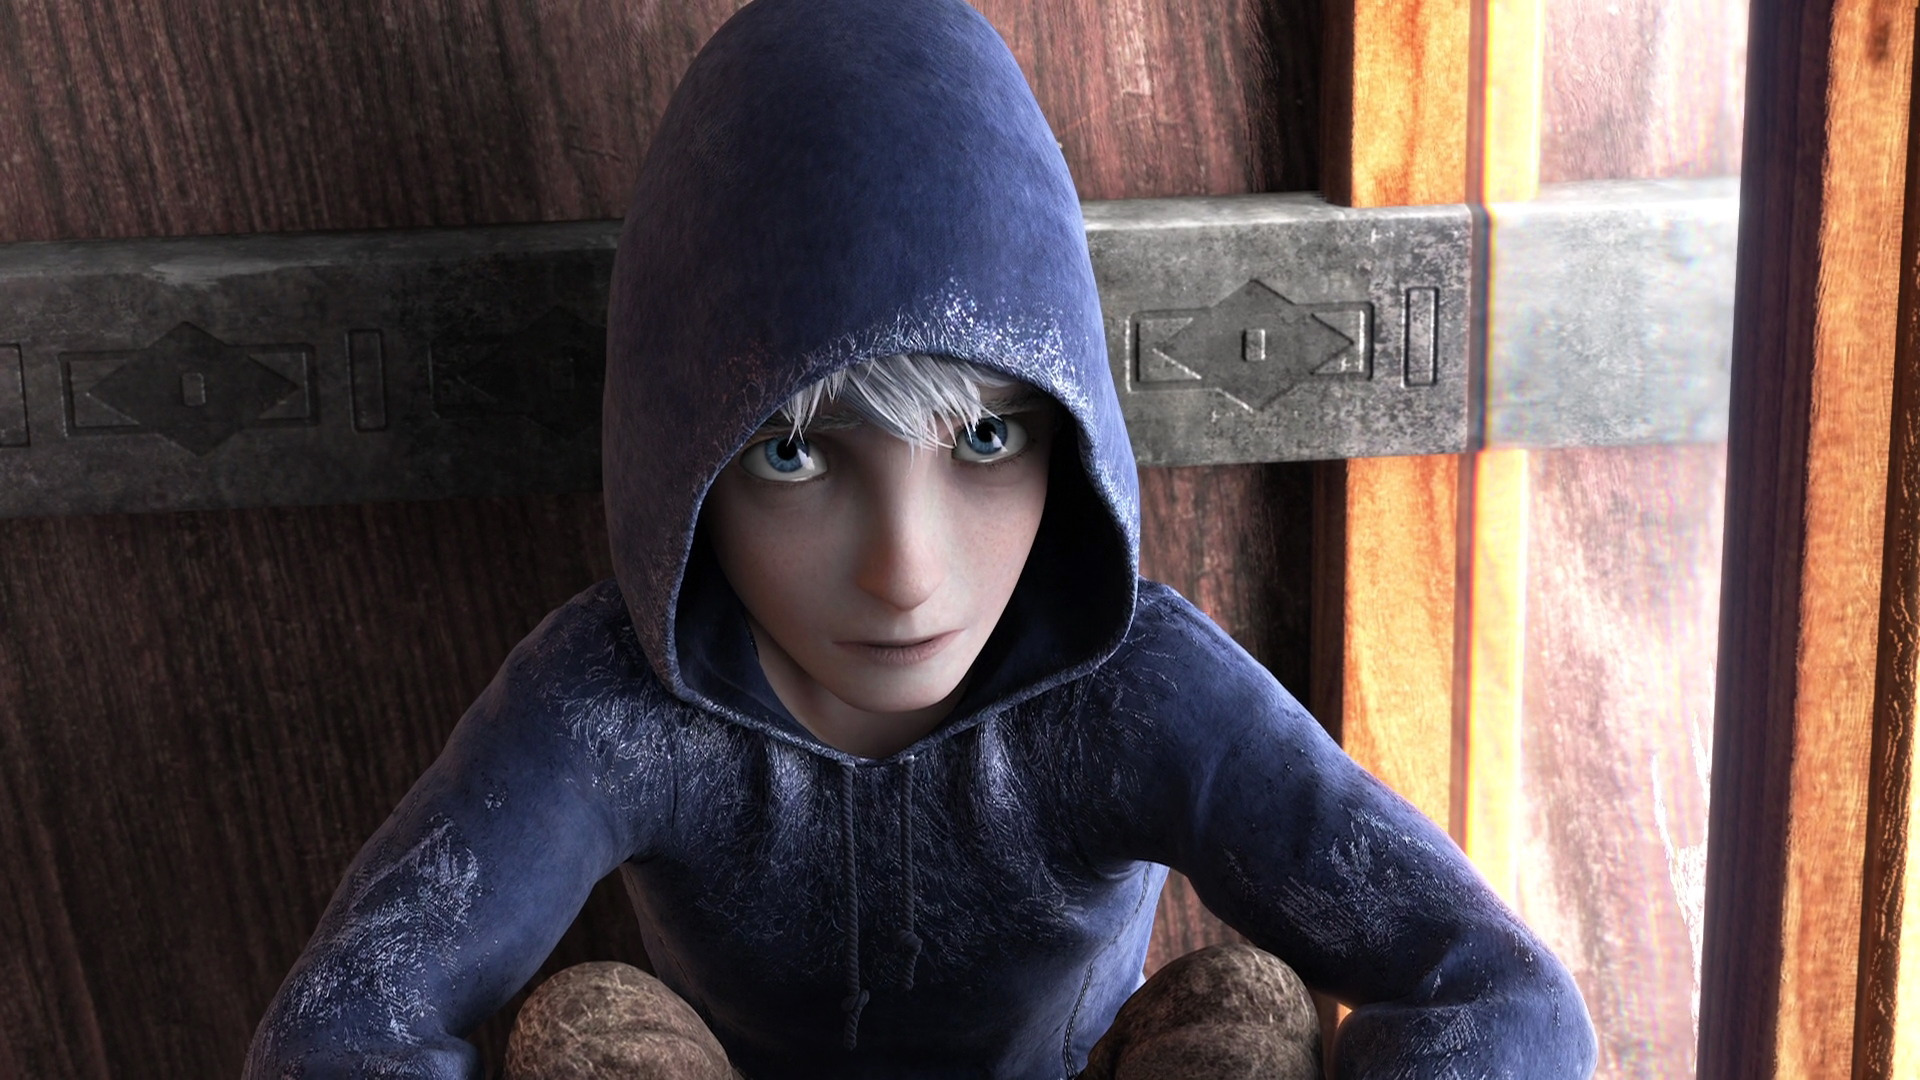 Free download Wallpaper 35 Wallpaper from Rise of the Guardians gamepressurecom [1920x1080] for your Desktop, Mobile & Tablet. Explore Dark Jack Frost Wallpaper. Dark Jack Frost Wallpaper, Jack Frost